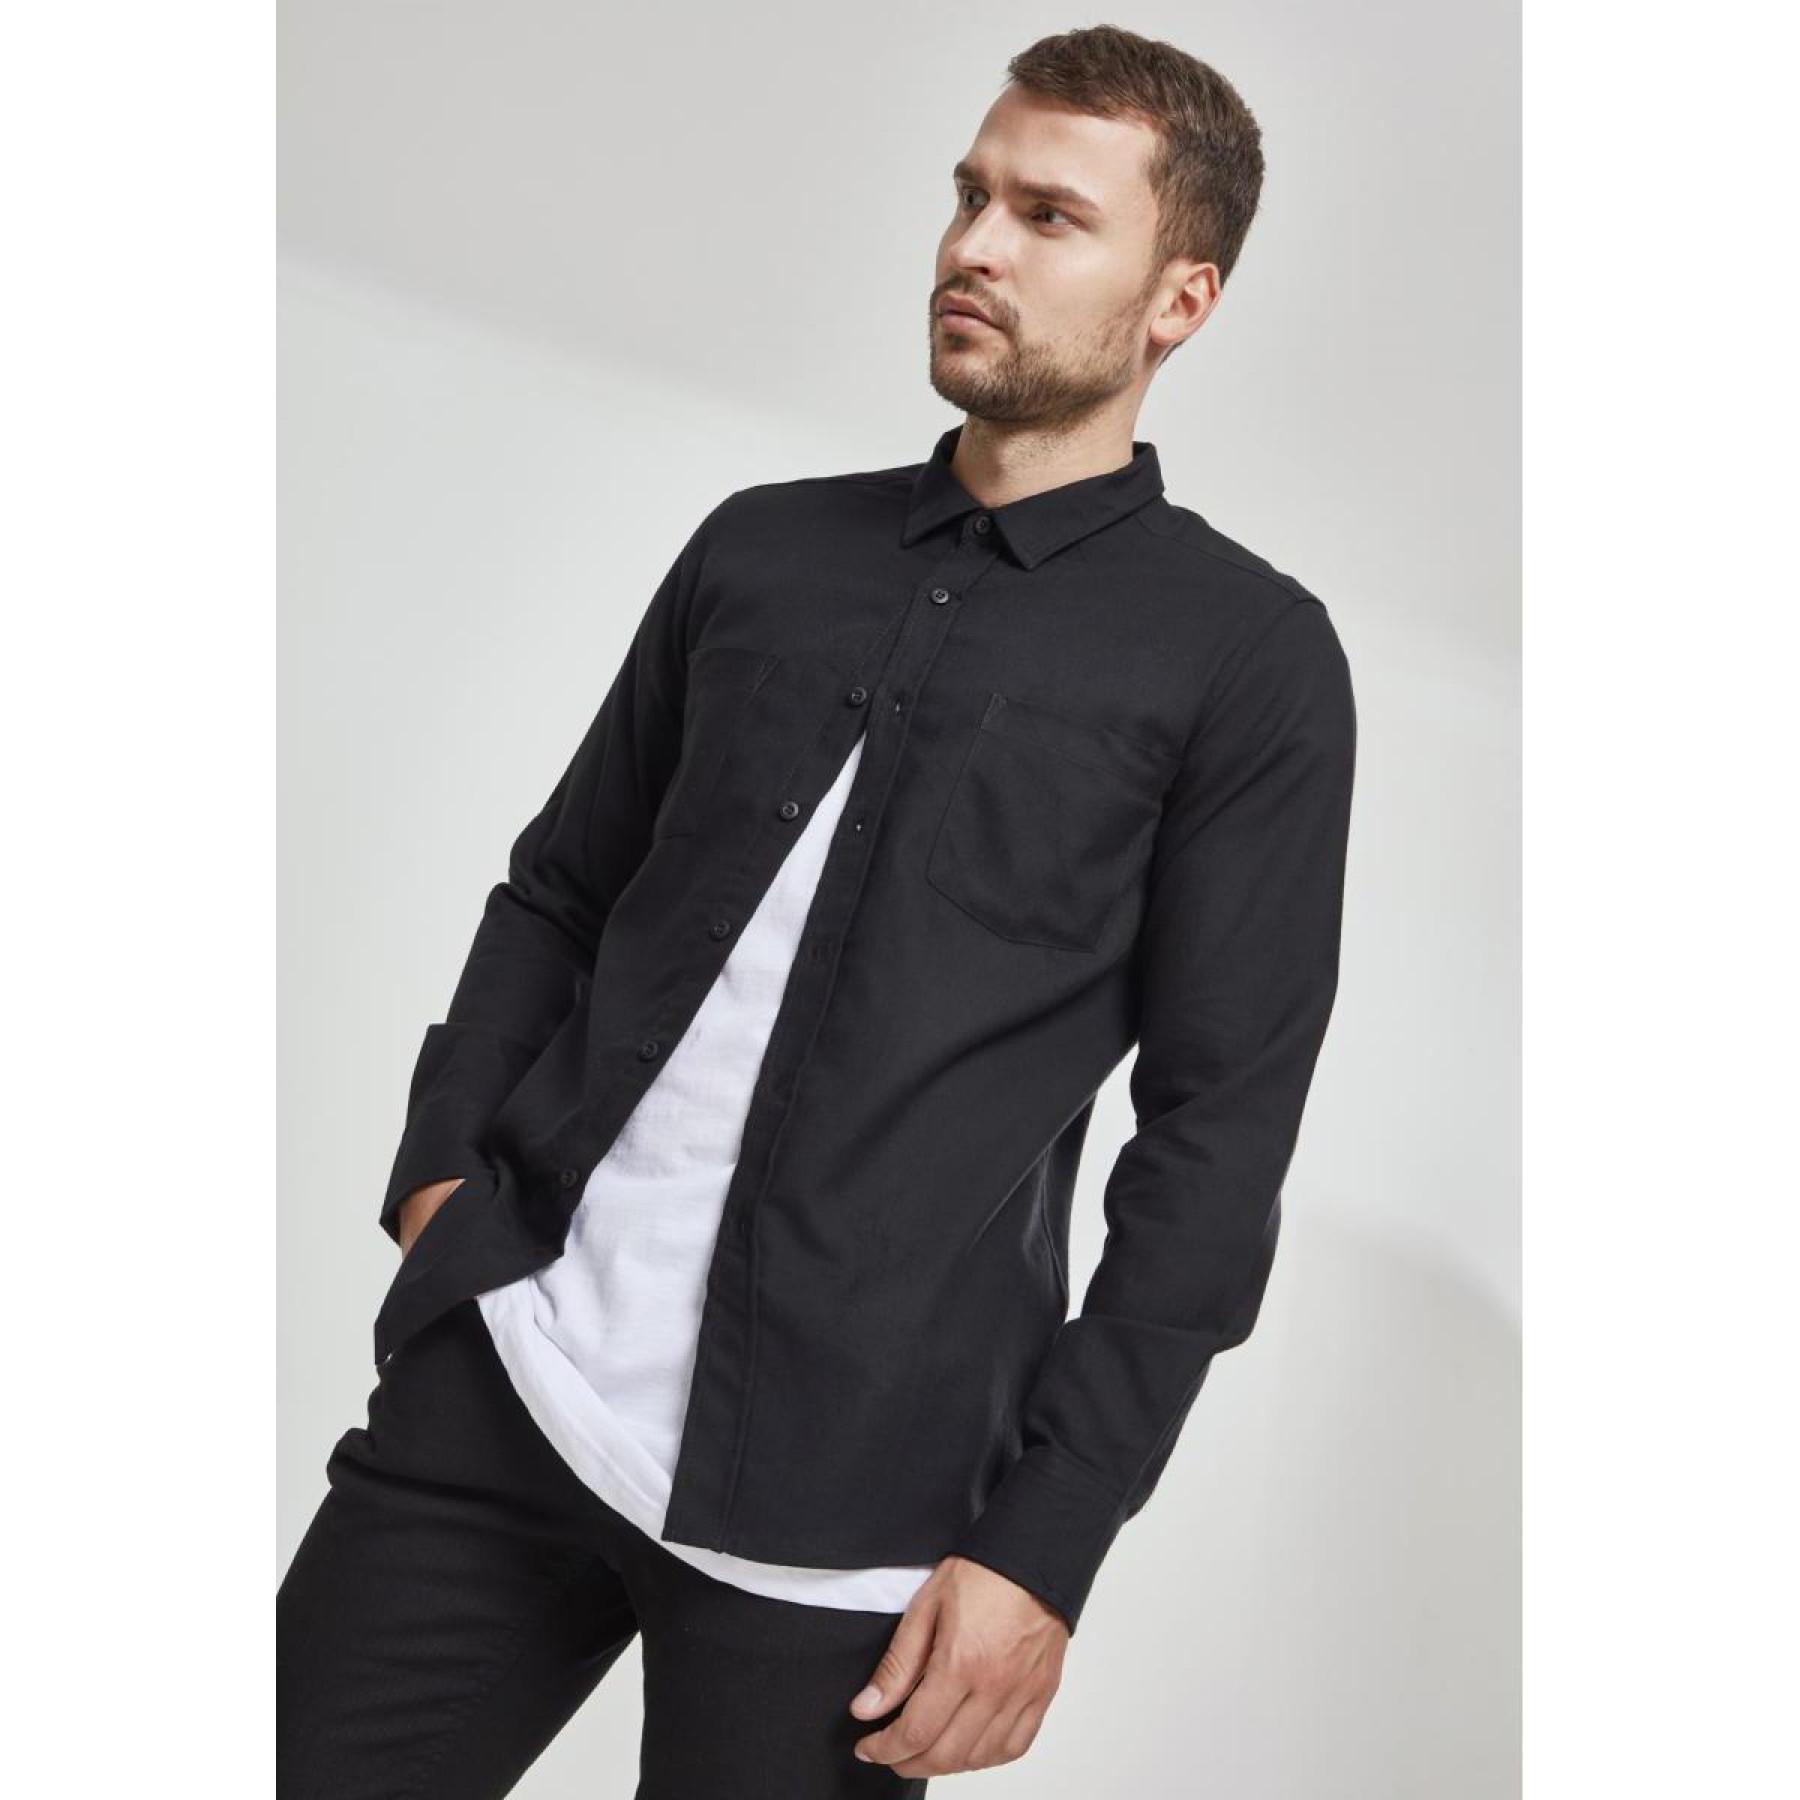 Chemise grandes tailles Urban Classic basic flanell